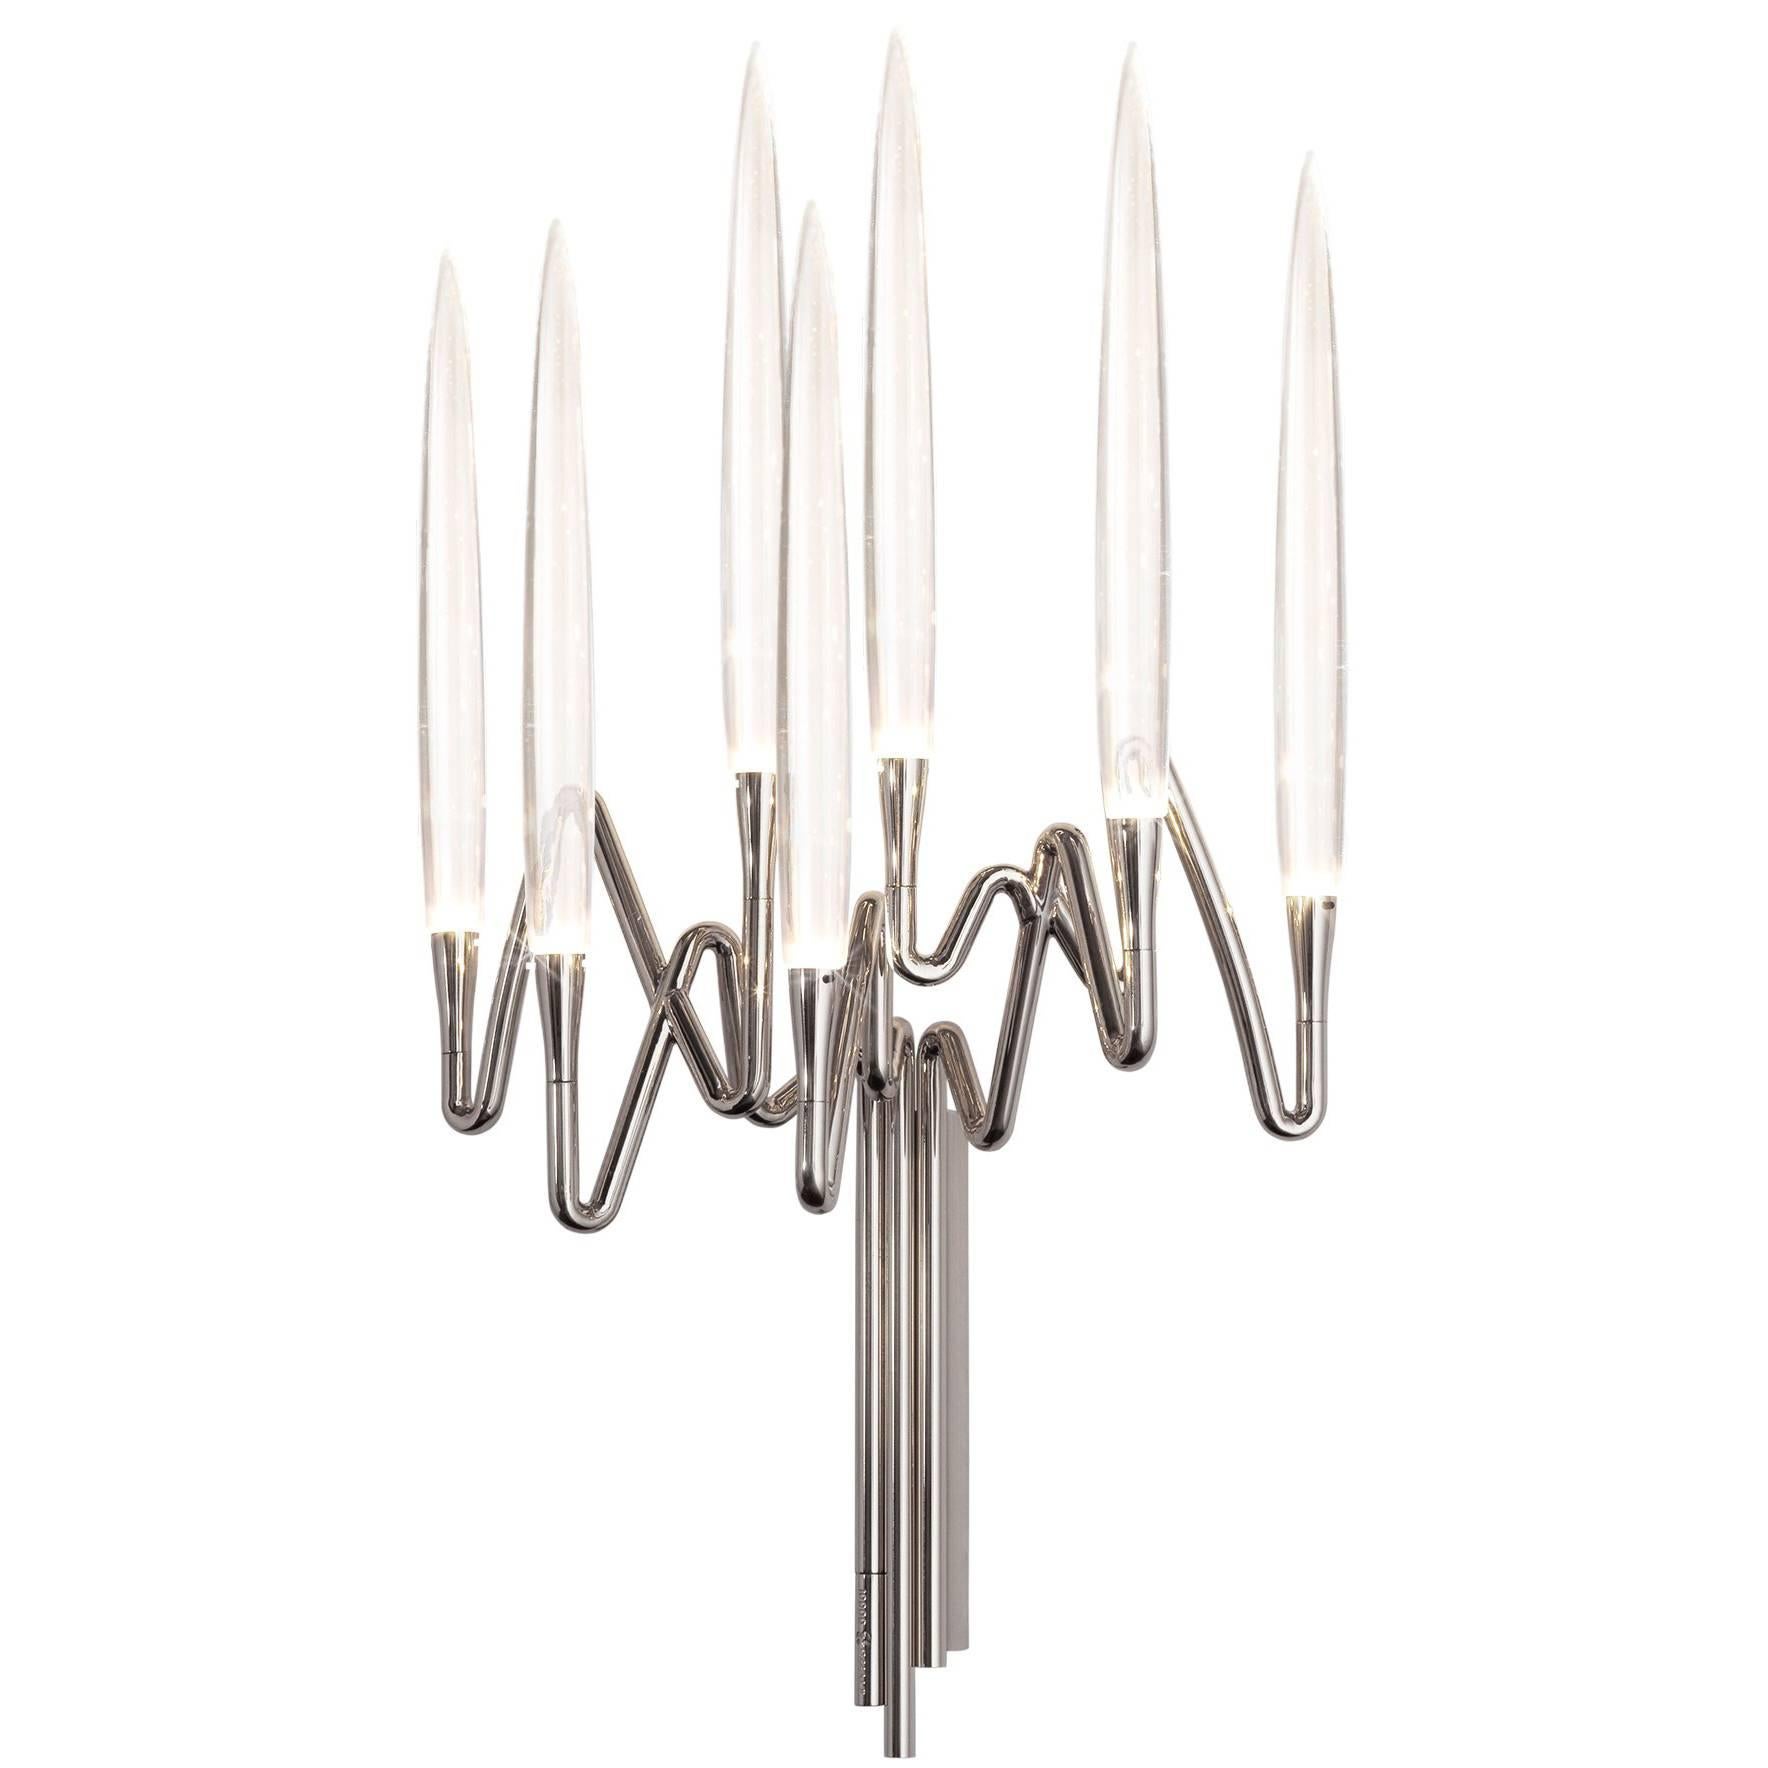 "Il Pezzo 3 Wall Sconce" - width 39cm/15.3" - nickel - crystal - LEDs